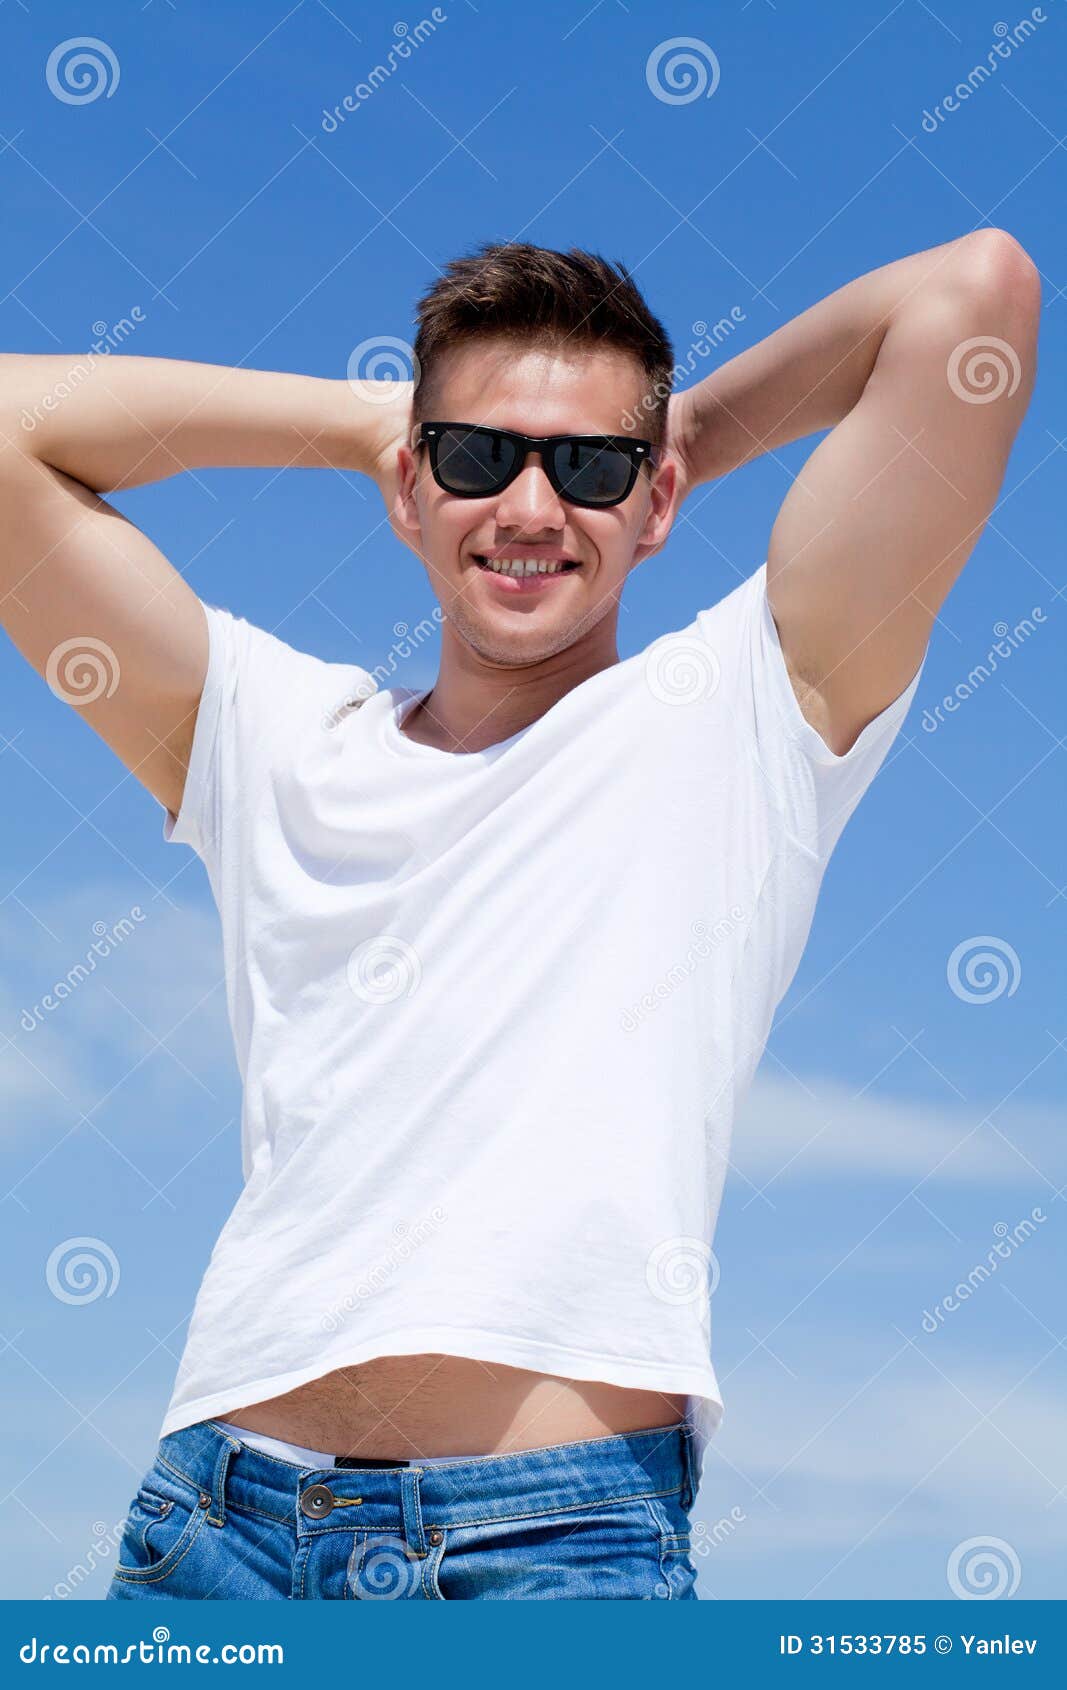 Attractive man stock image. Image of health, carefree - 31533785